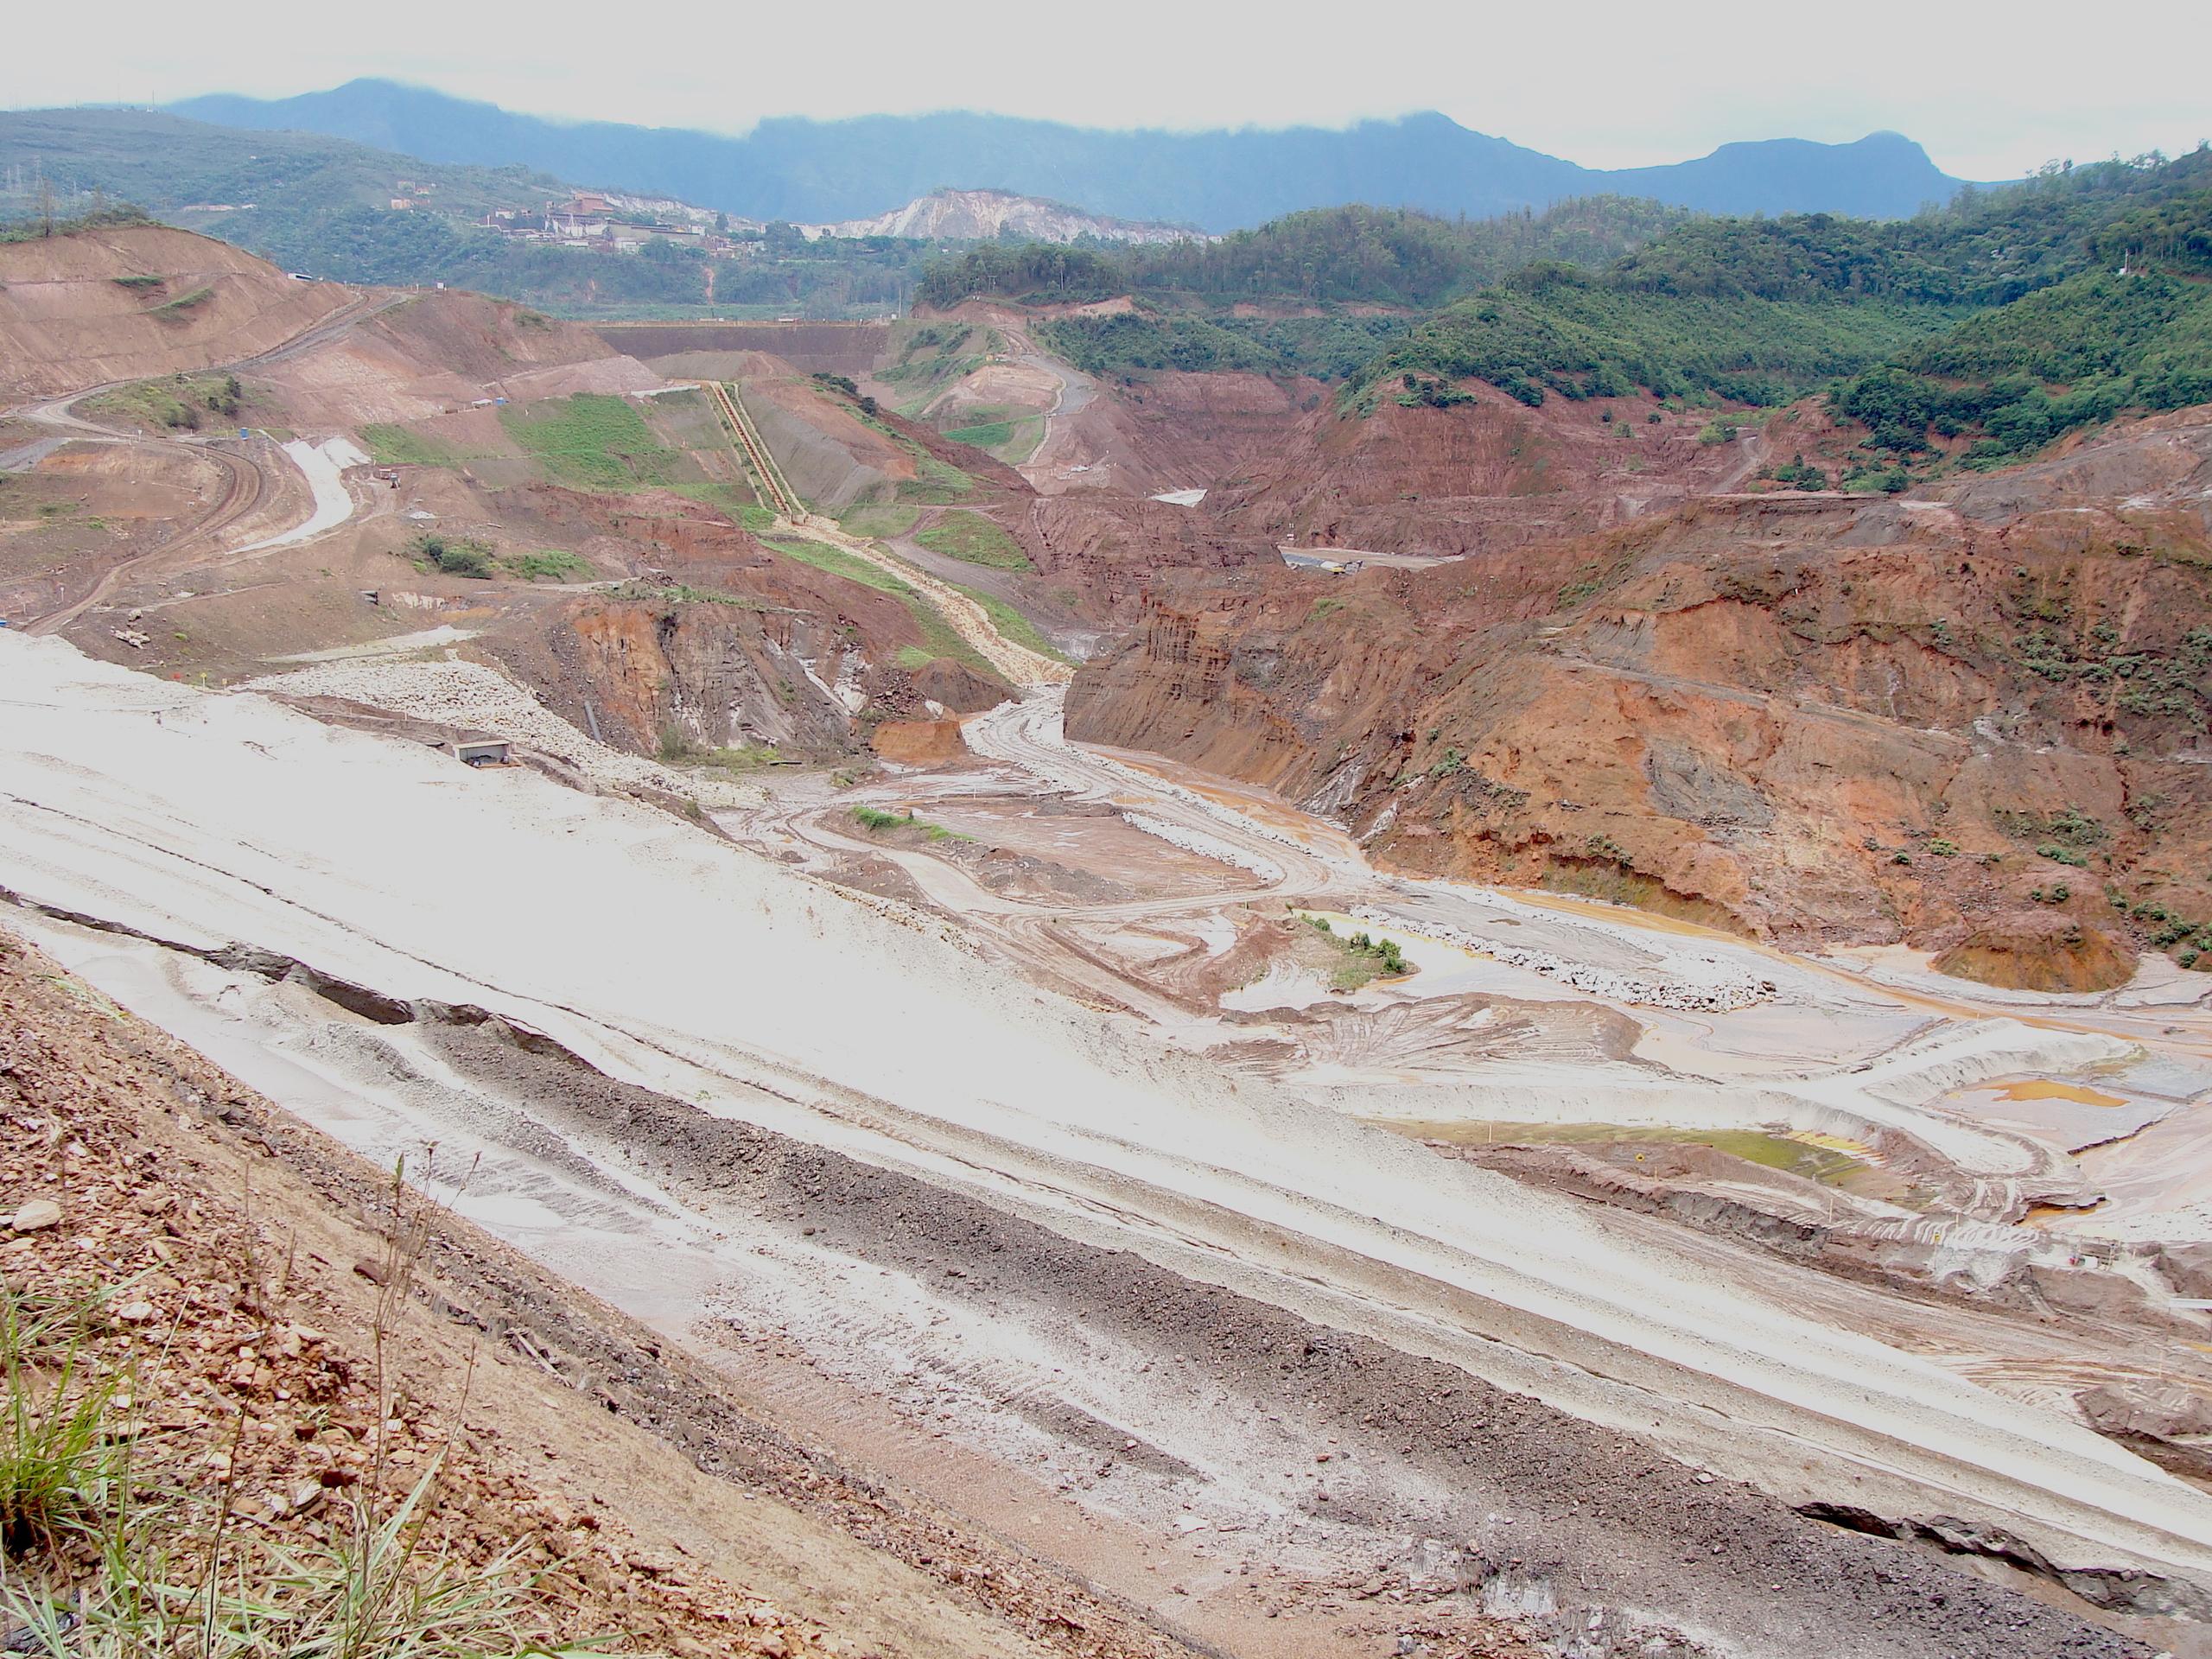 The Brumadinho tailings dam disaster resulted in the death of 270 people, changing the insurance landscape very rapidly. Overnight insurers woke up to the full financial impact that a significant tailings failure could have on business.